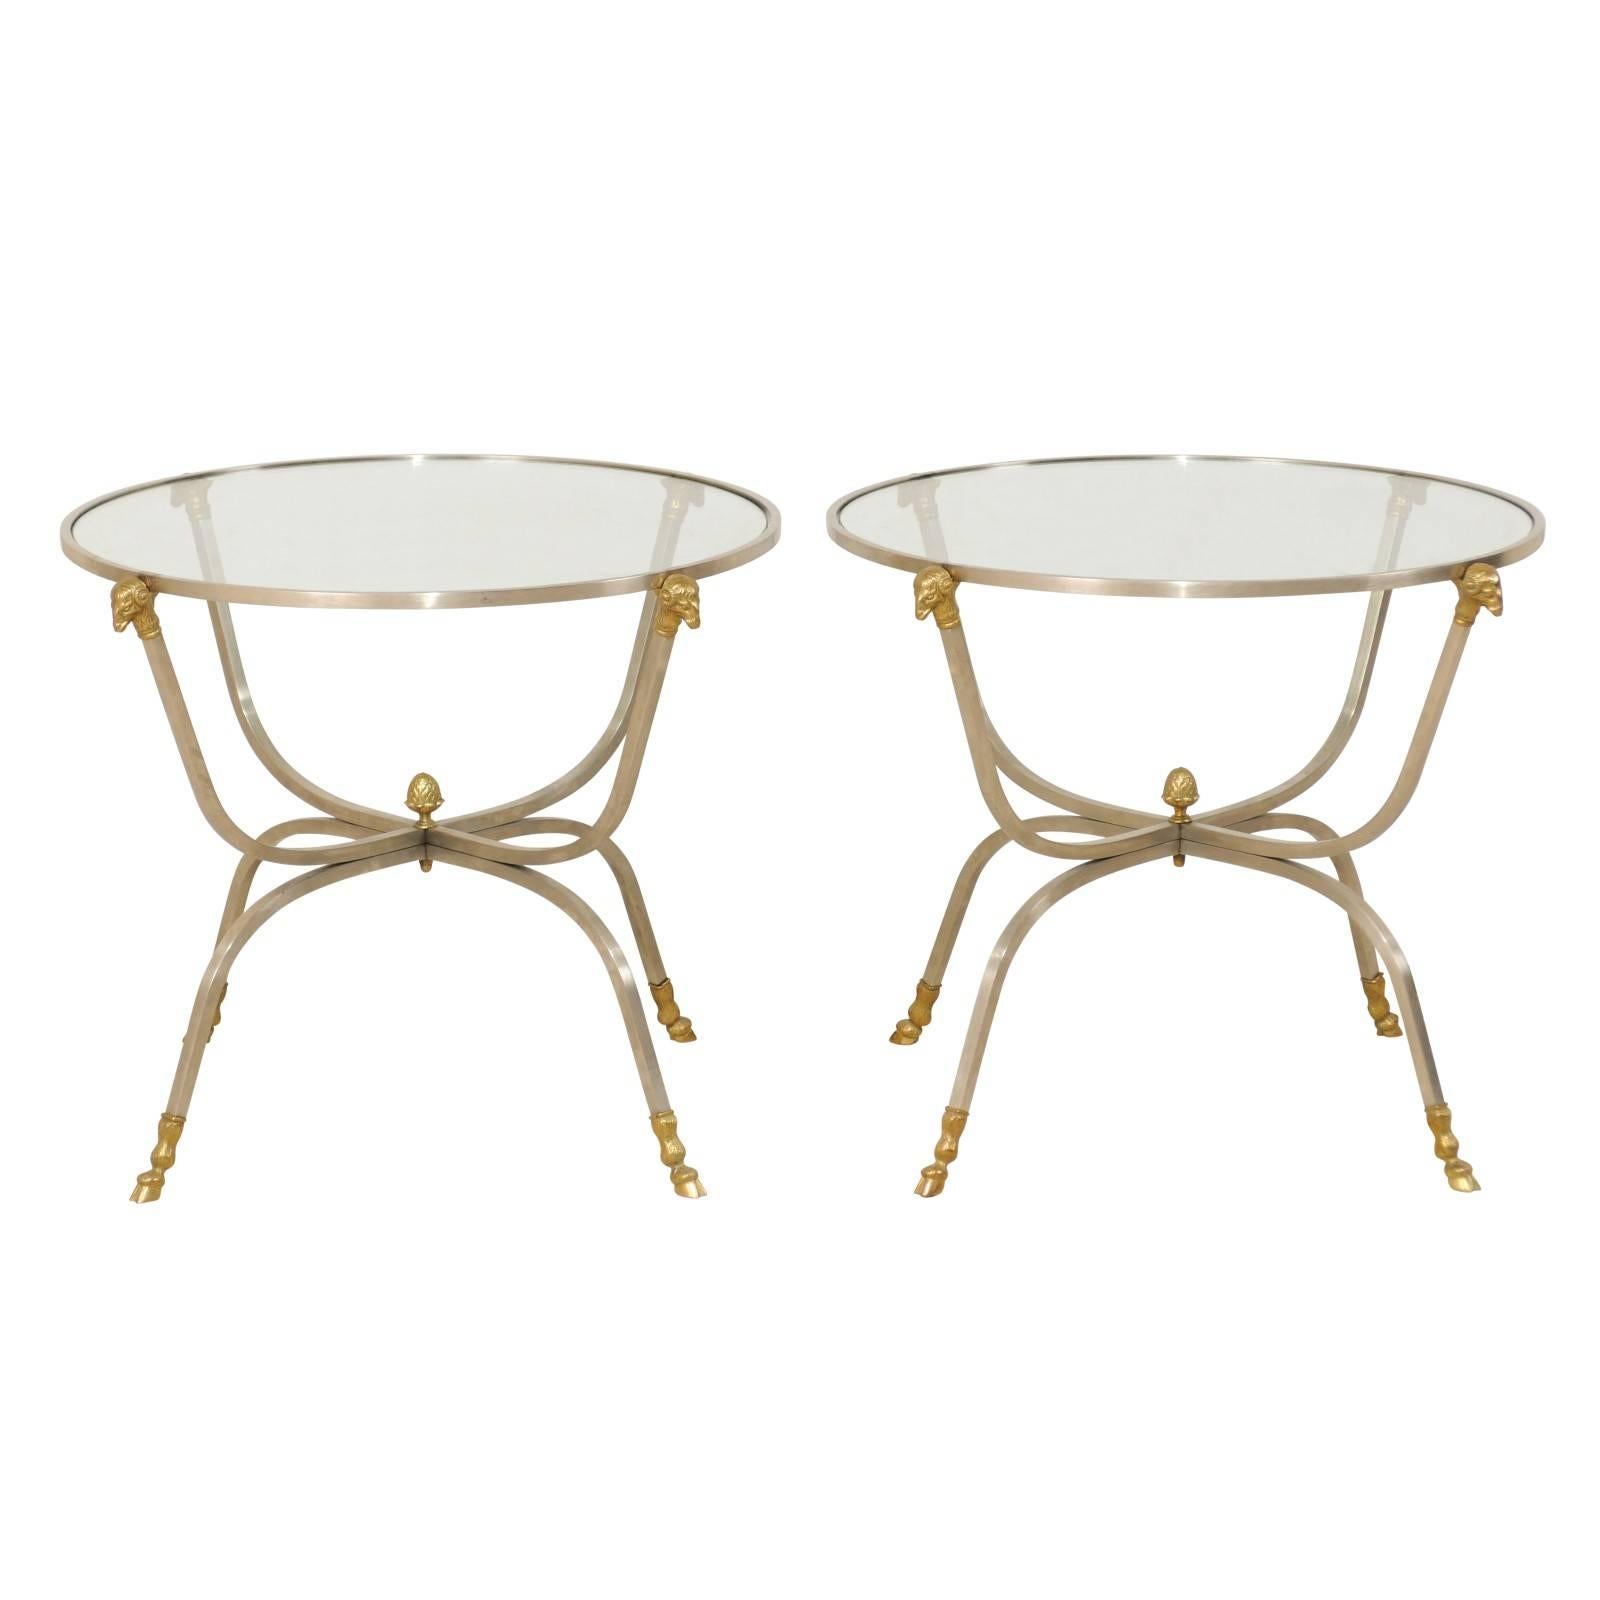 Pair of Italian Glass, Brass and Silver Metal Side Tables with Ram's Head Motifs